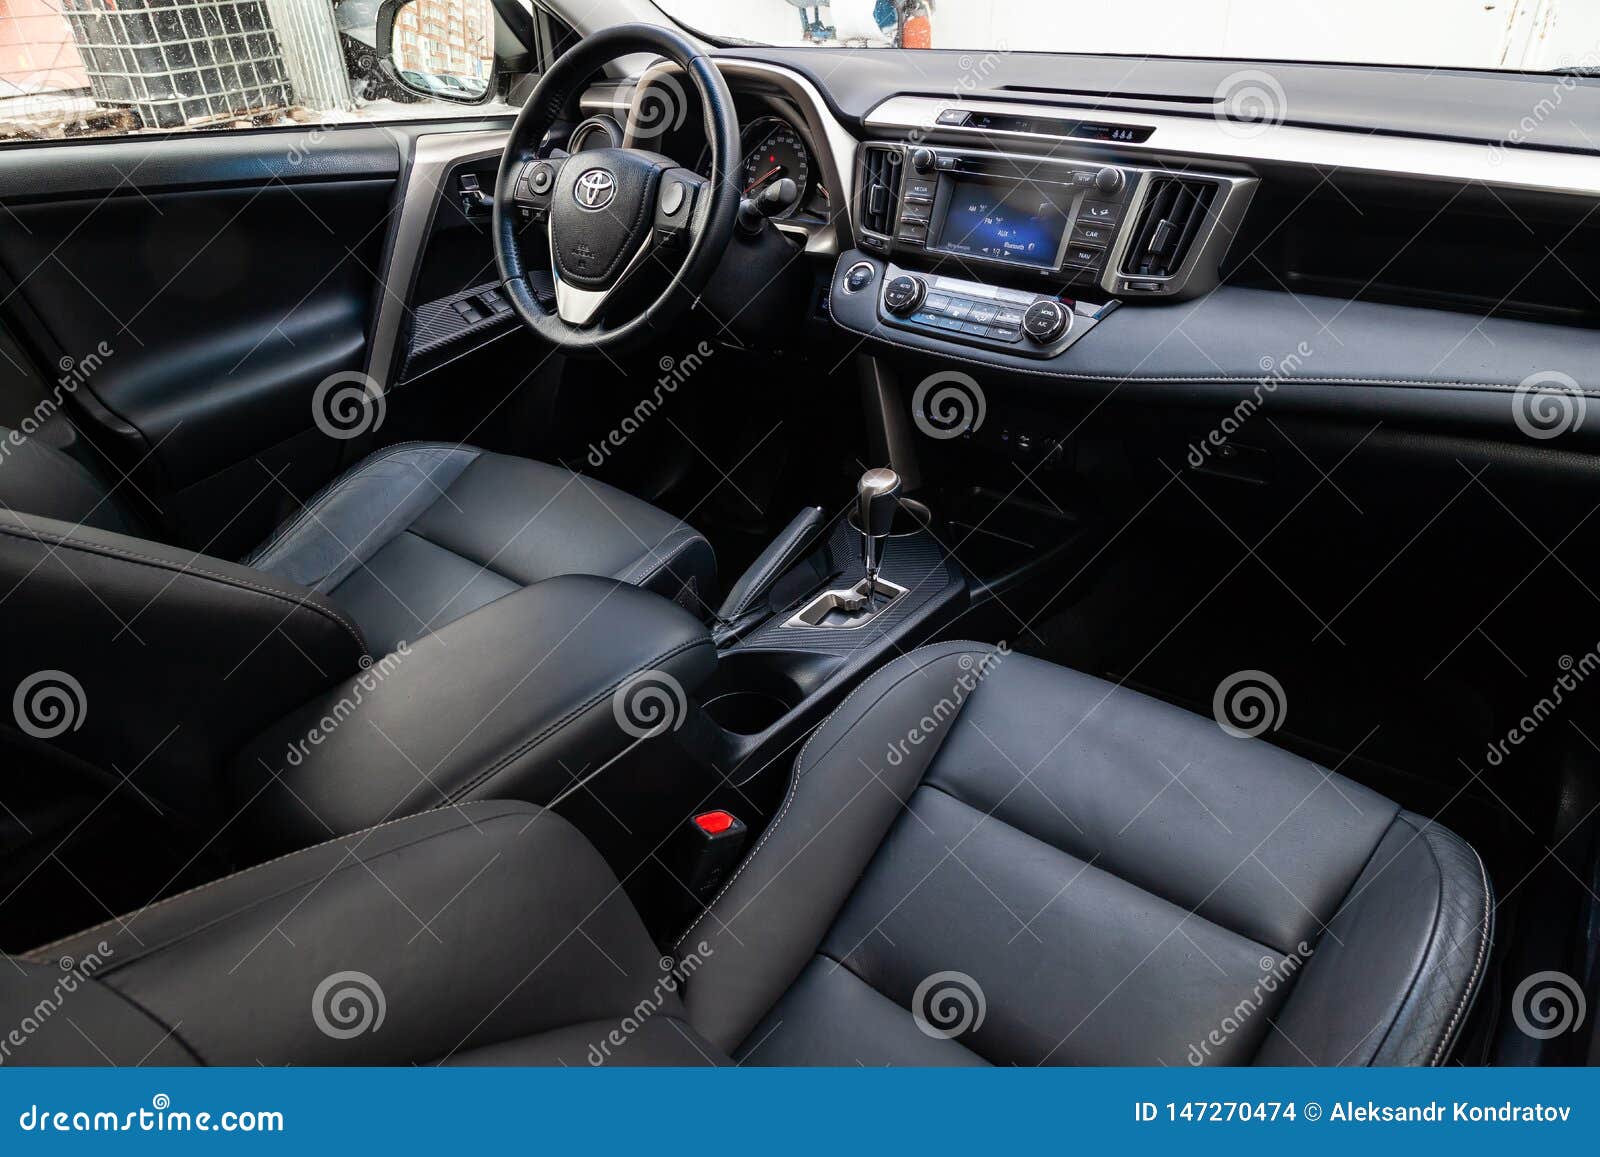 The Interior Of The Car Toyota Rav4 With A View Of The